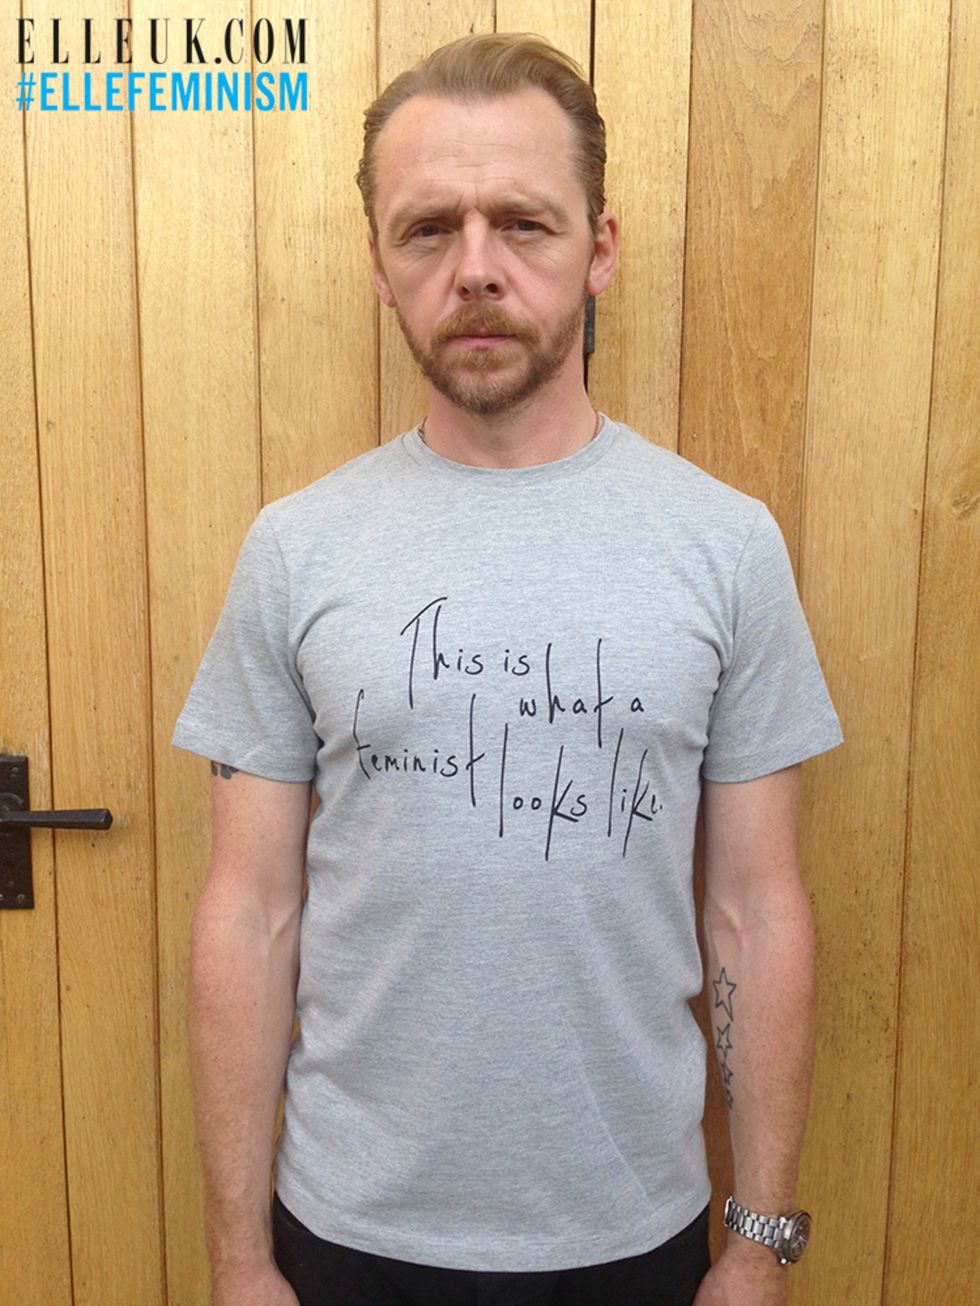 Simon Pegg, actor and feminist